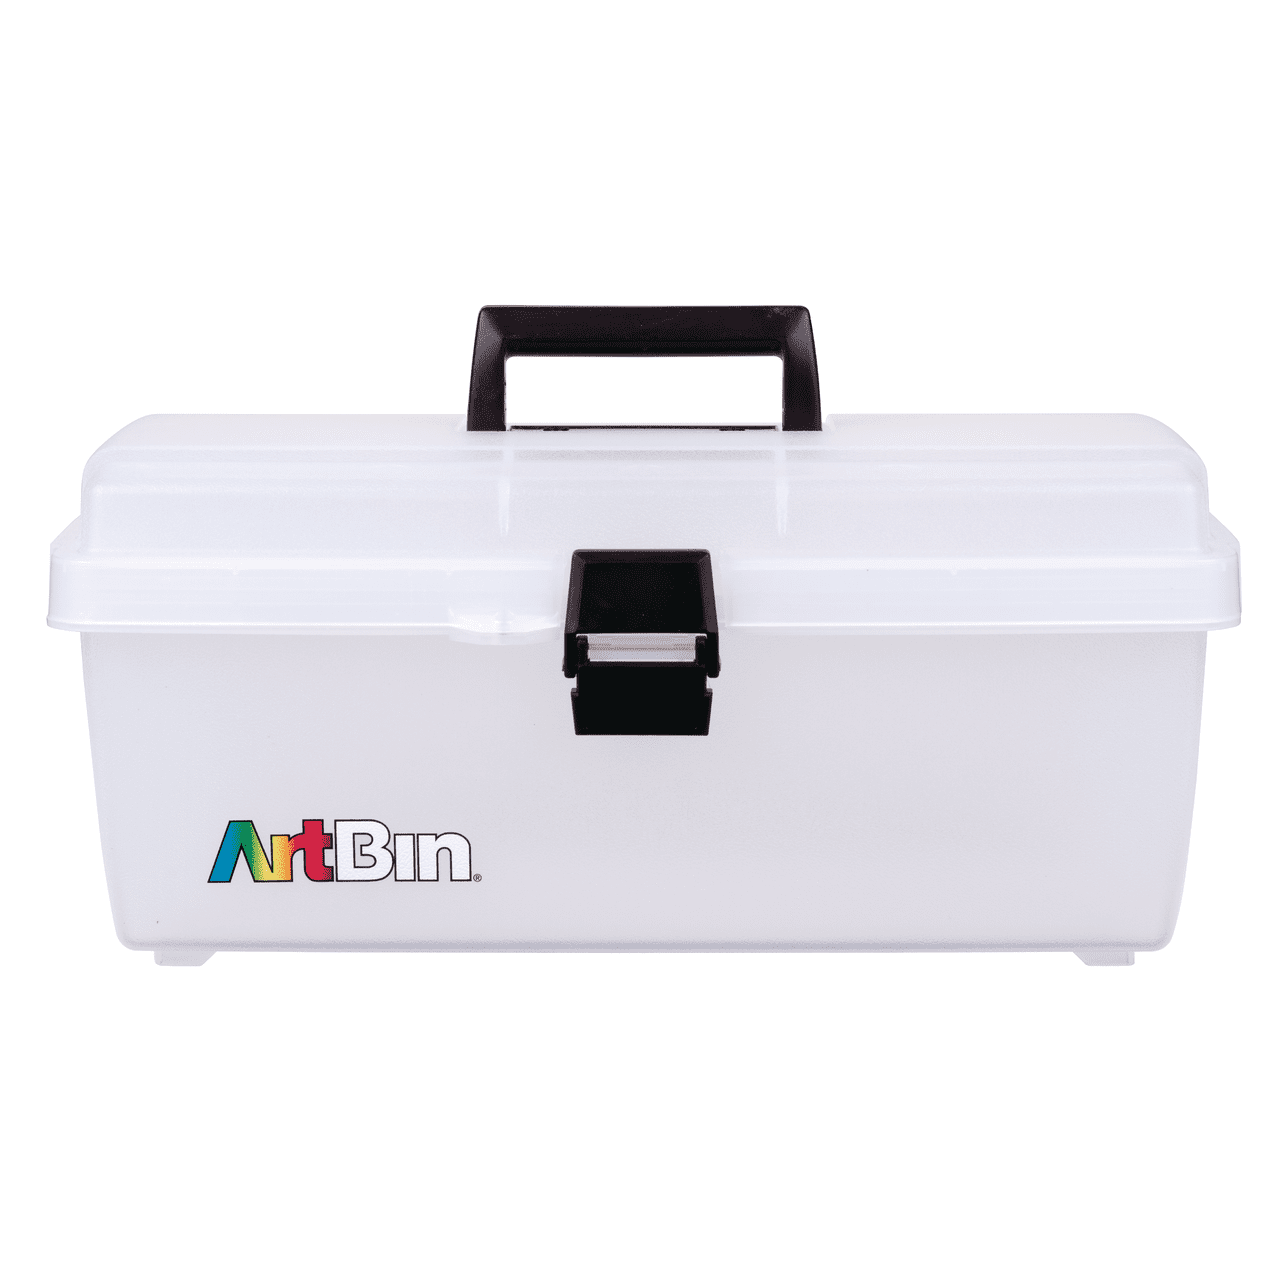 ARTBIN ESSENTIALS LIFT OUT TRAY BOX with HANDLE is CLEAR for CRAFT STORAGE case 